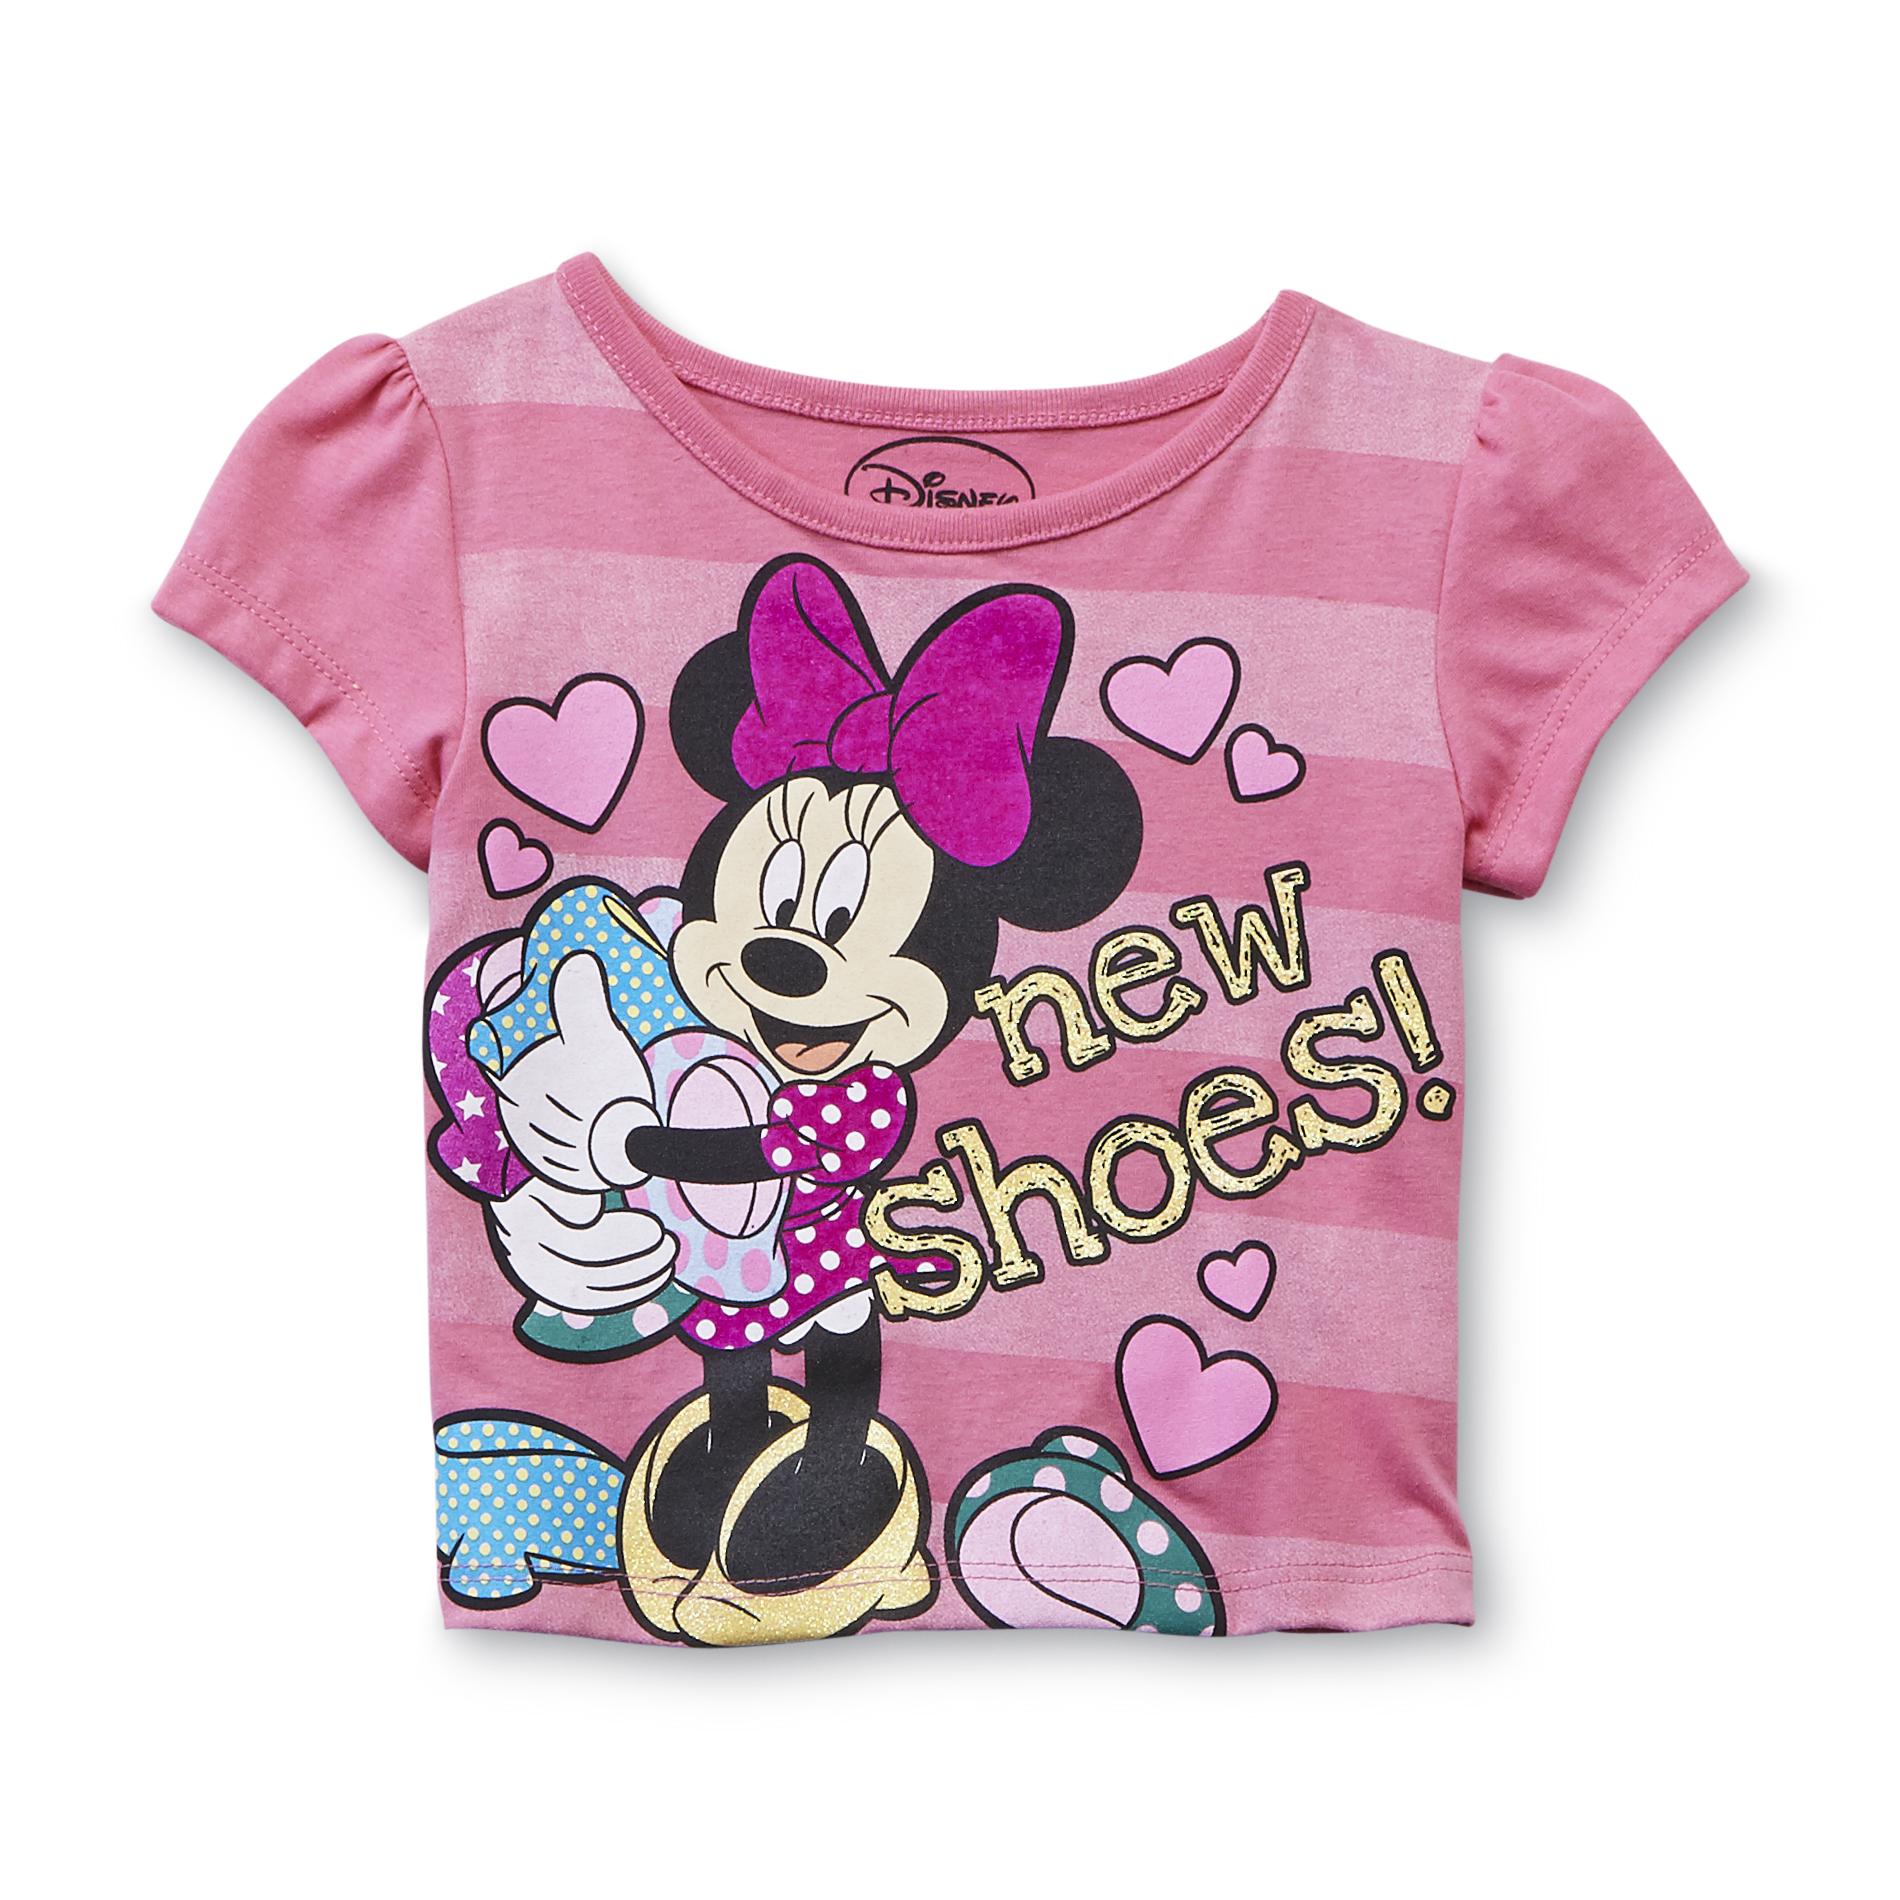 Disney Minnie Mouse Toddler Girl's T-Shirt - New Shoes